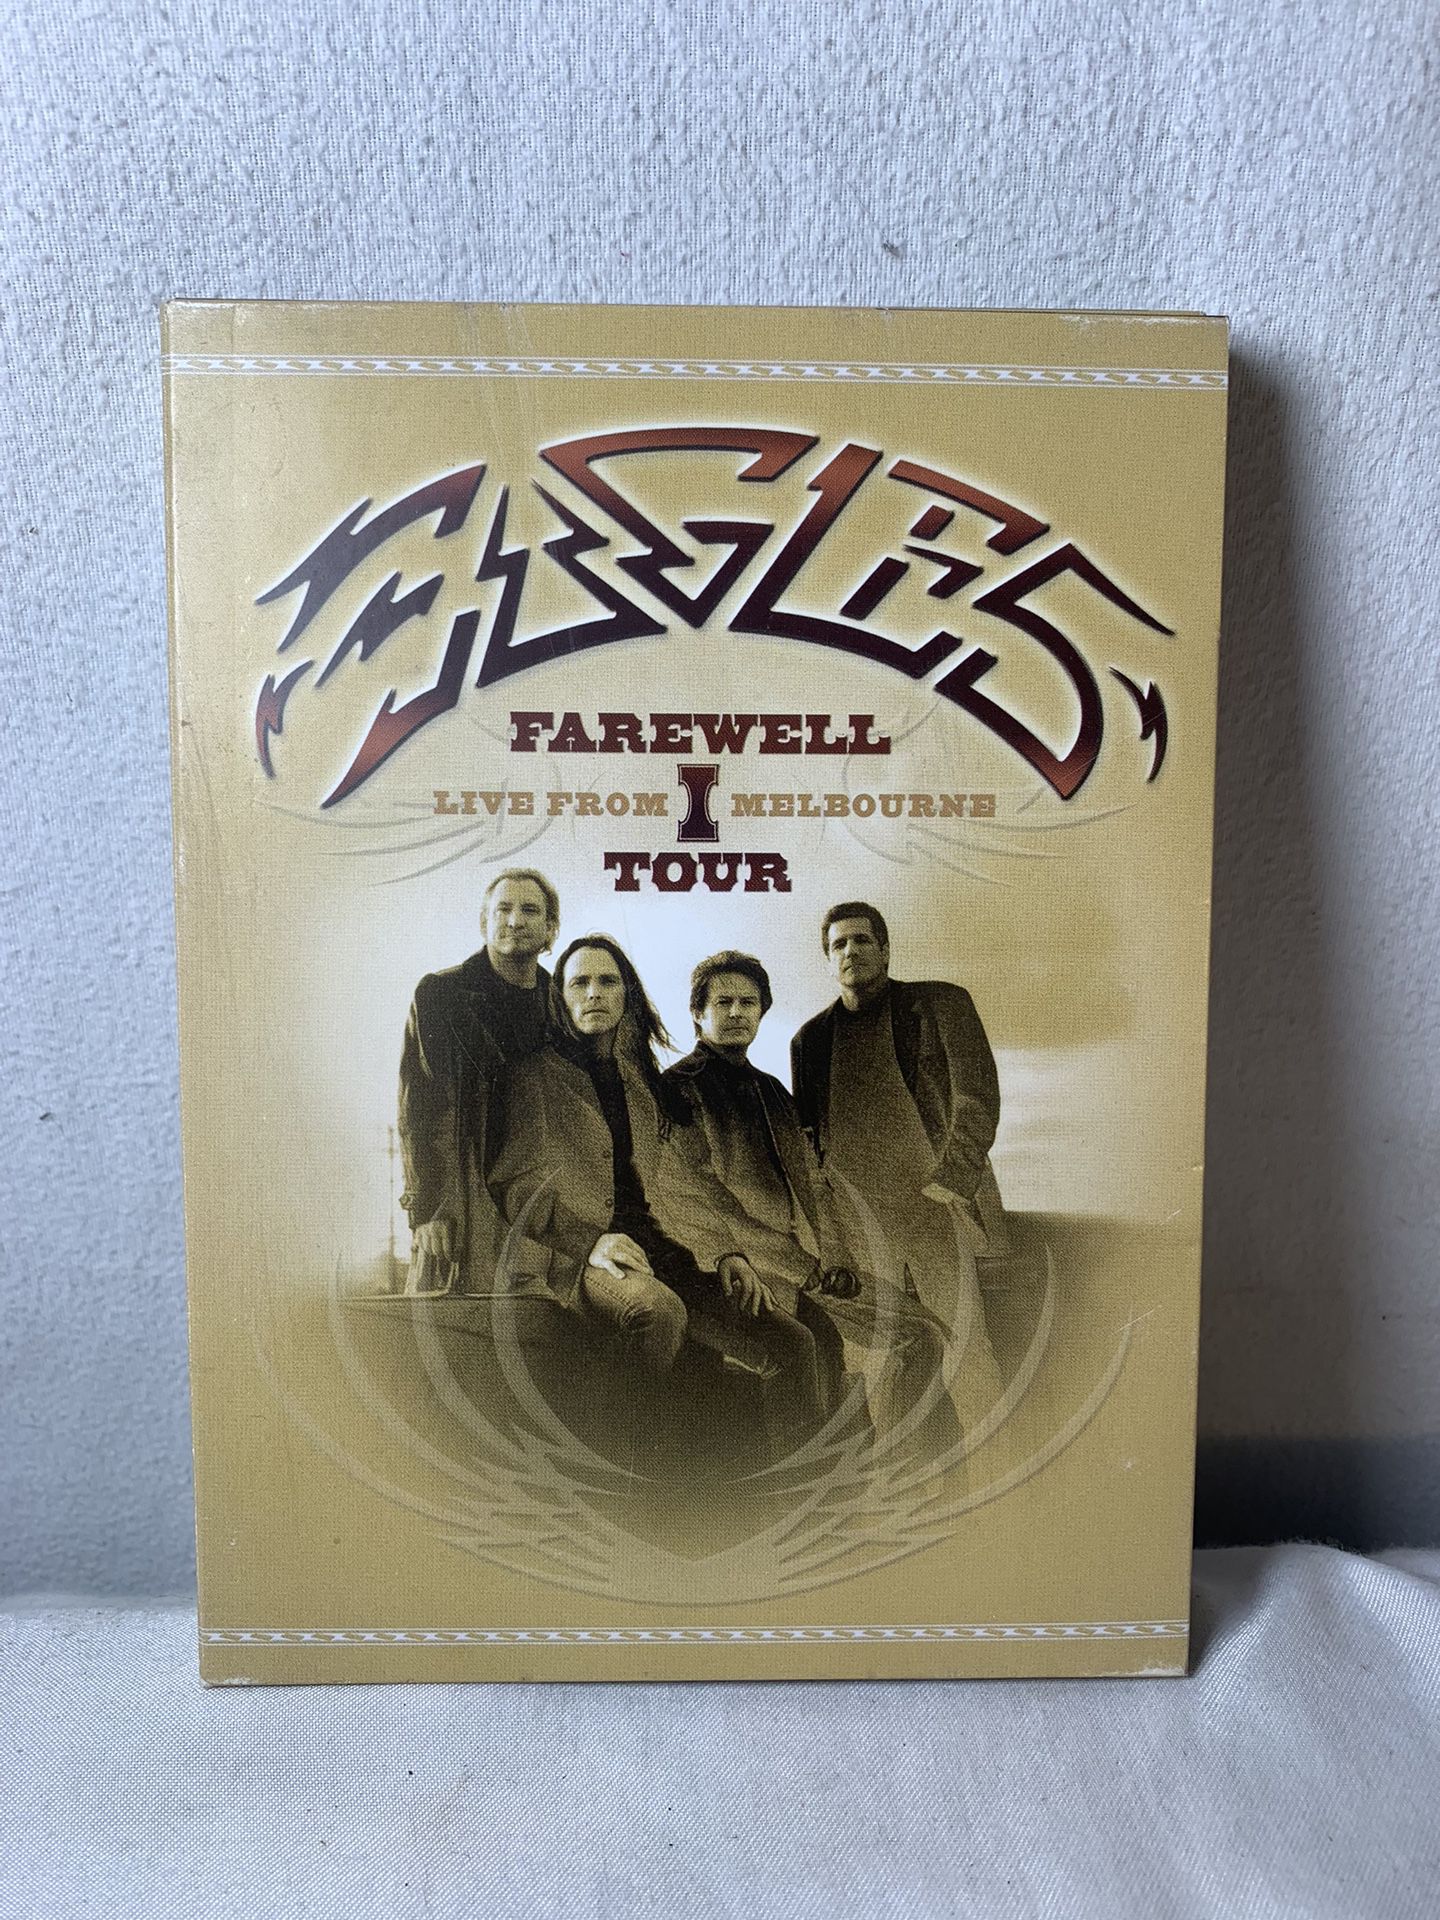 The Eagles Farewell 1 Tour: Live from Melbourne (DVD, 2005, 2-Disc Set)